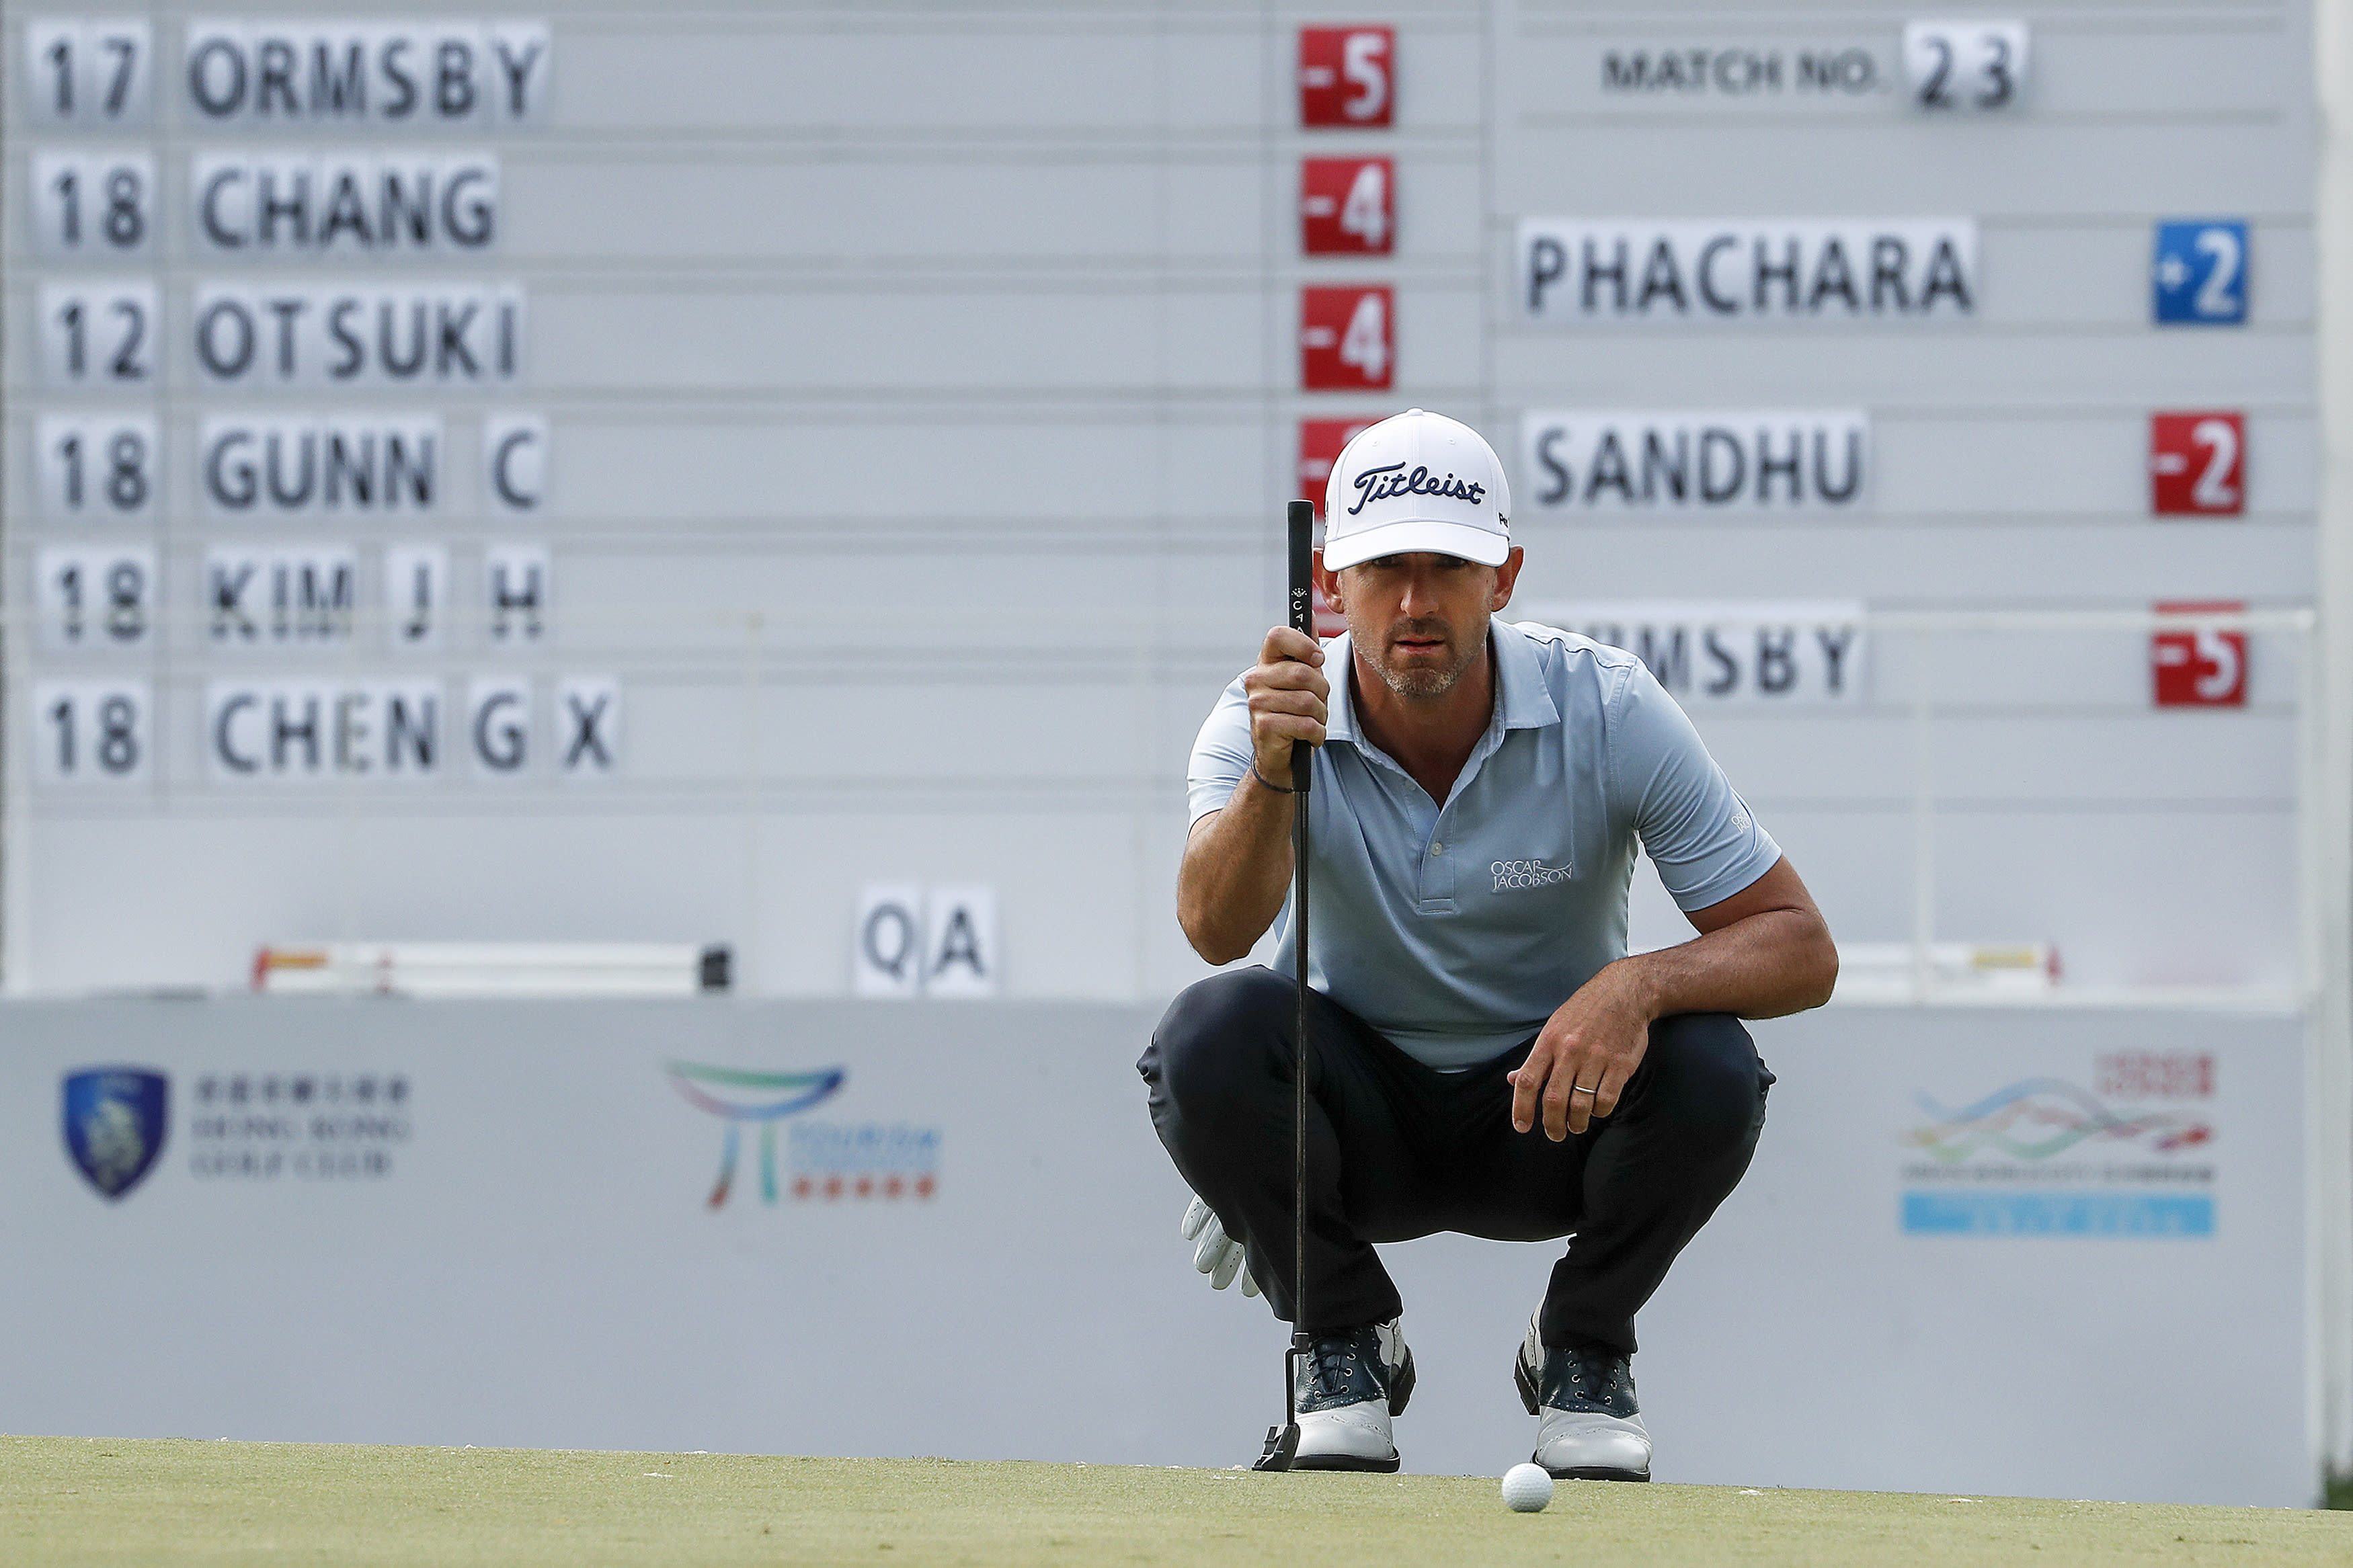 Ormsby And Otsuki Share Early Lead At Hong Kong Open